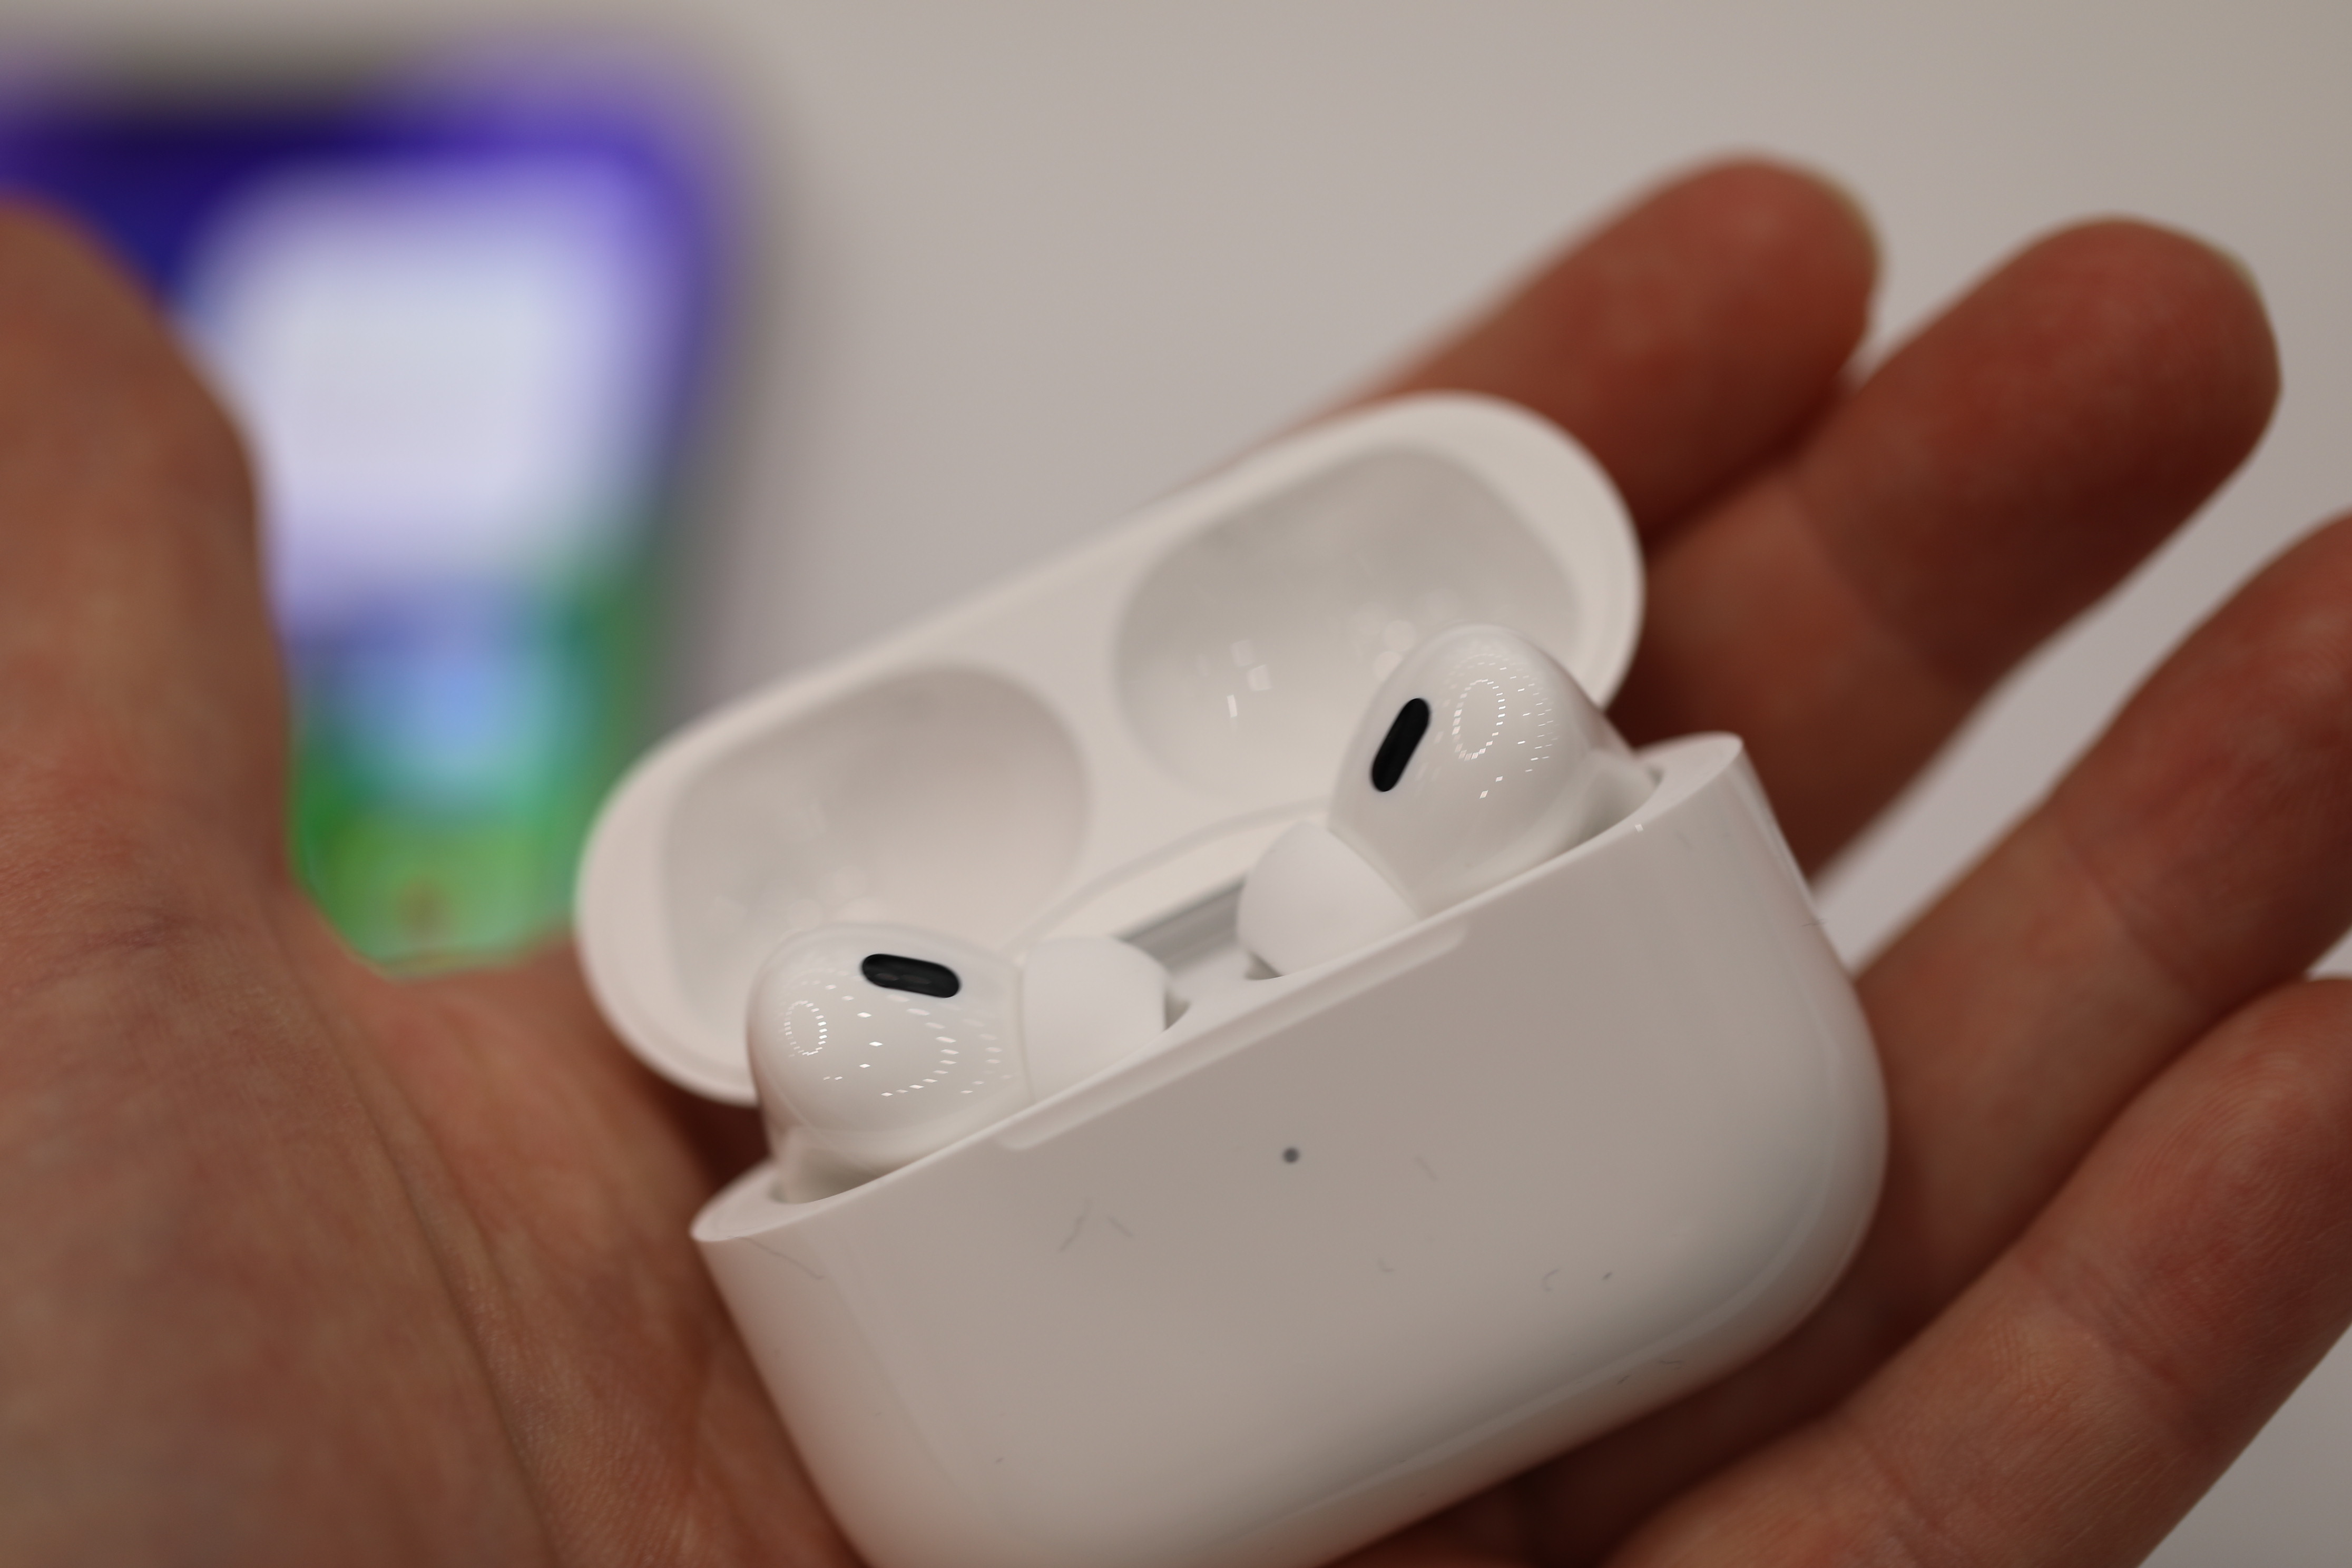 Airpod Pros from Apple Fall Event 2022